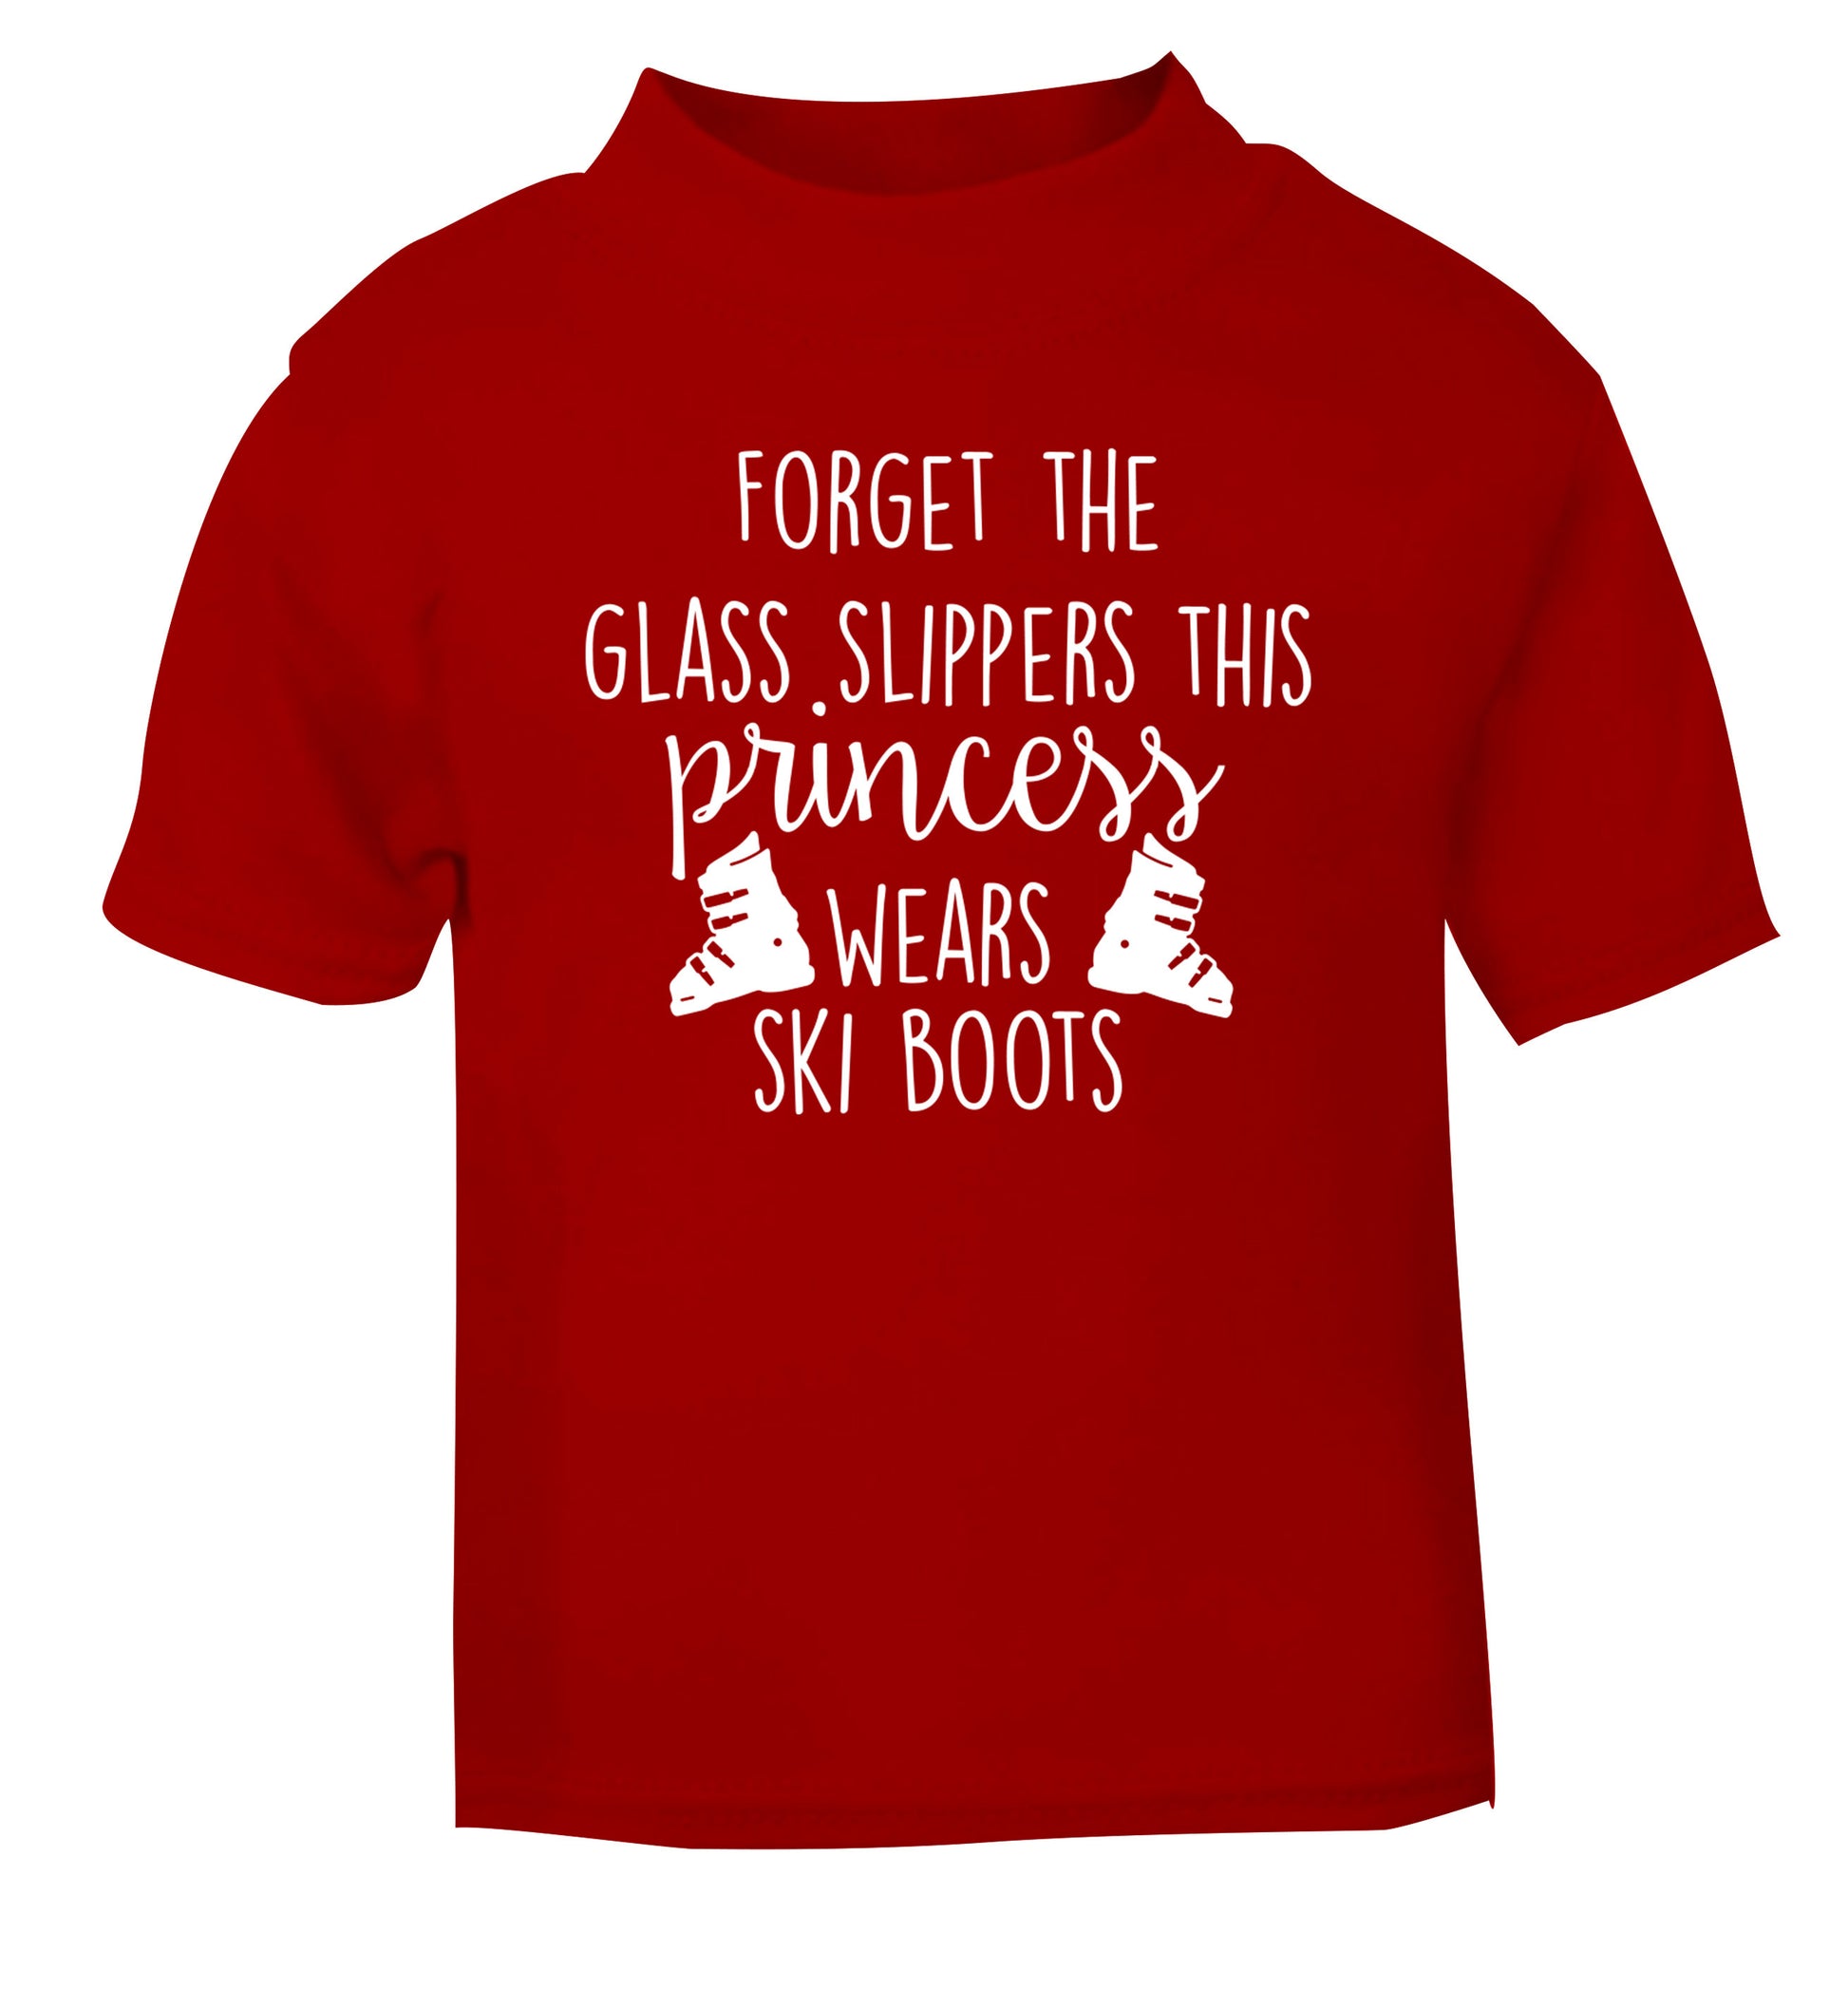 Forget the glass slippers this princess wears ski boots red Baby Toddler Tshirt 2 Years